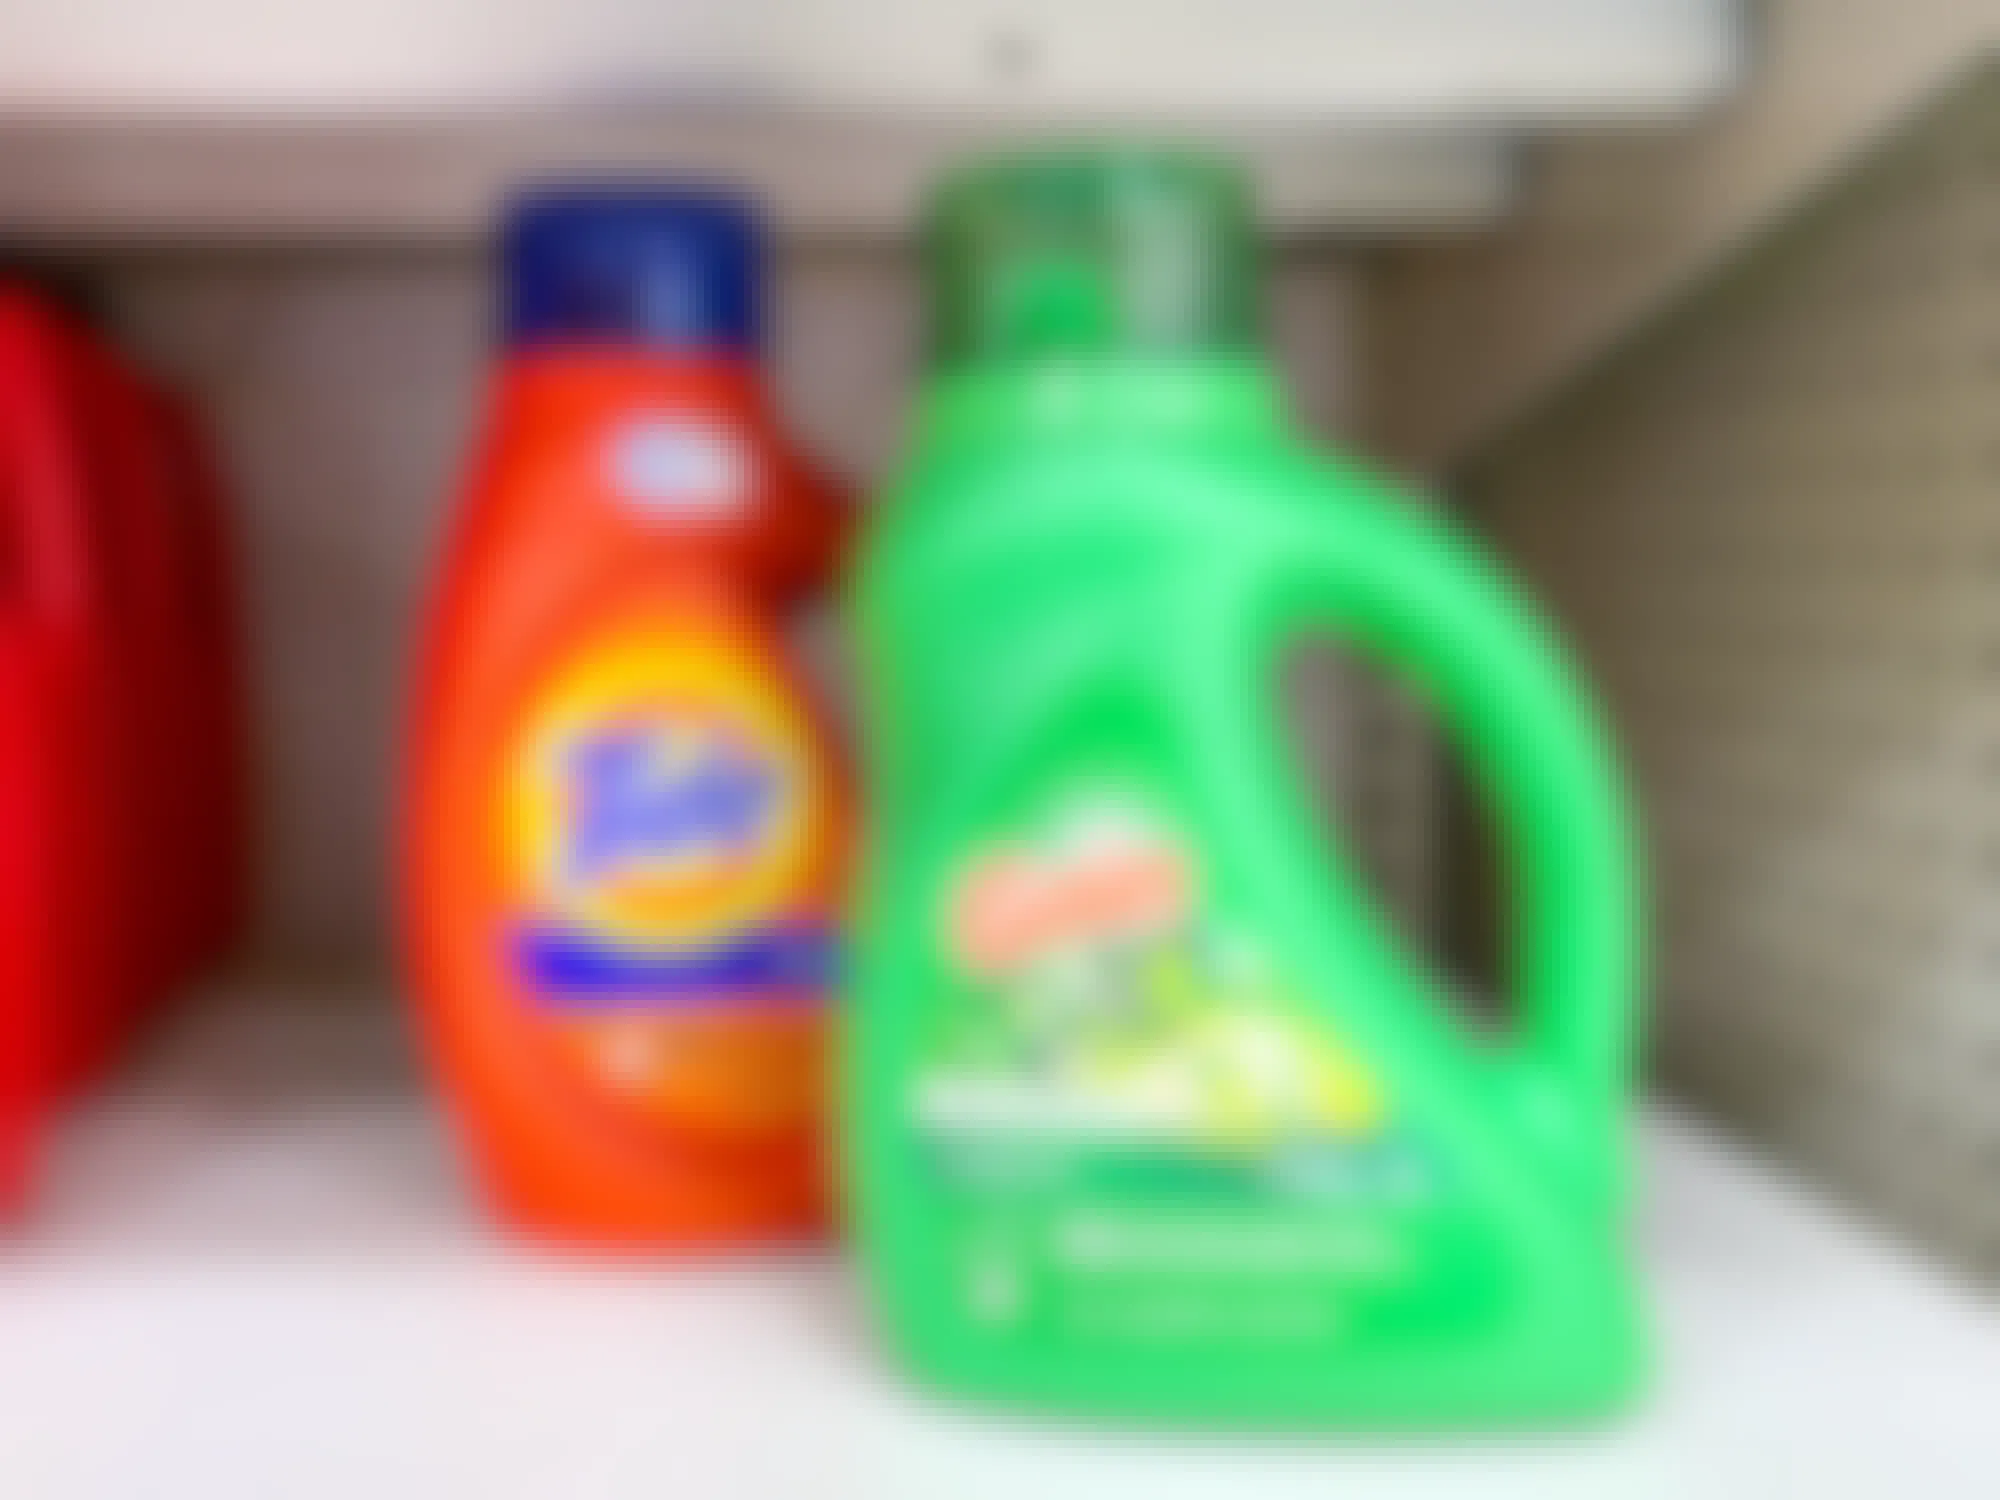 bottles of tide and gain original laundry detergents on store shelf